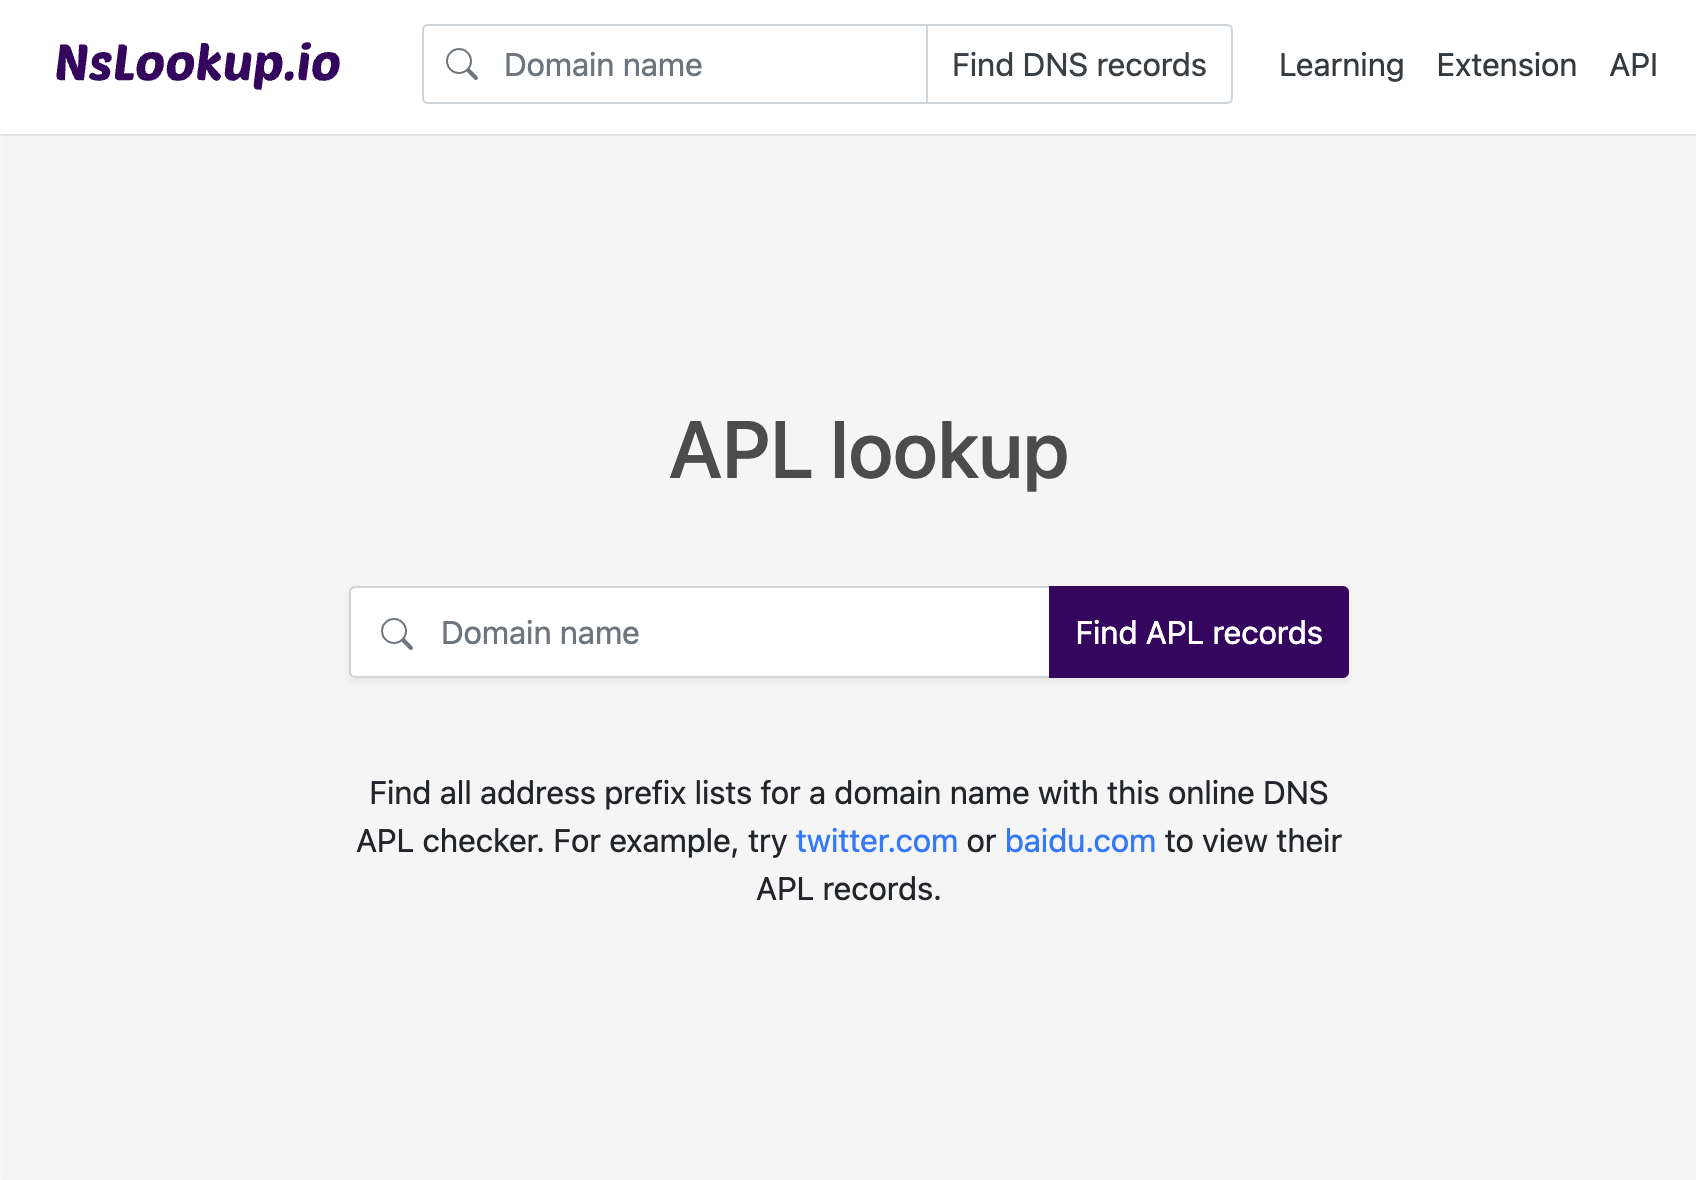 Open the APL lookup tool